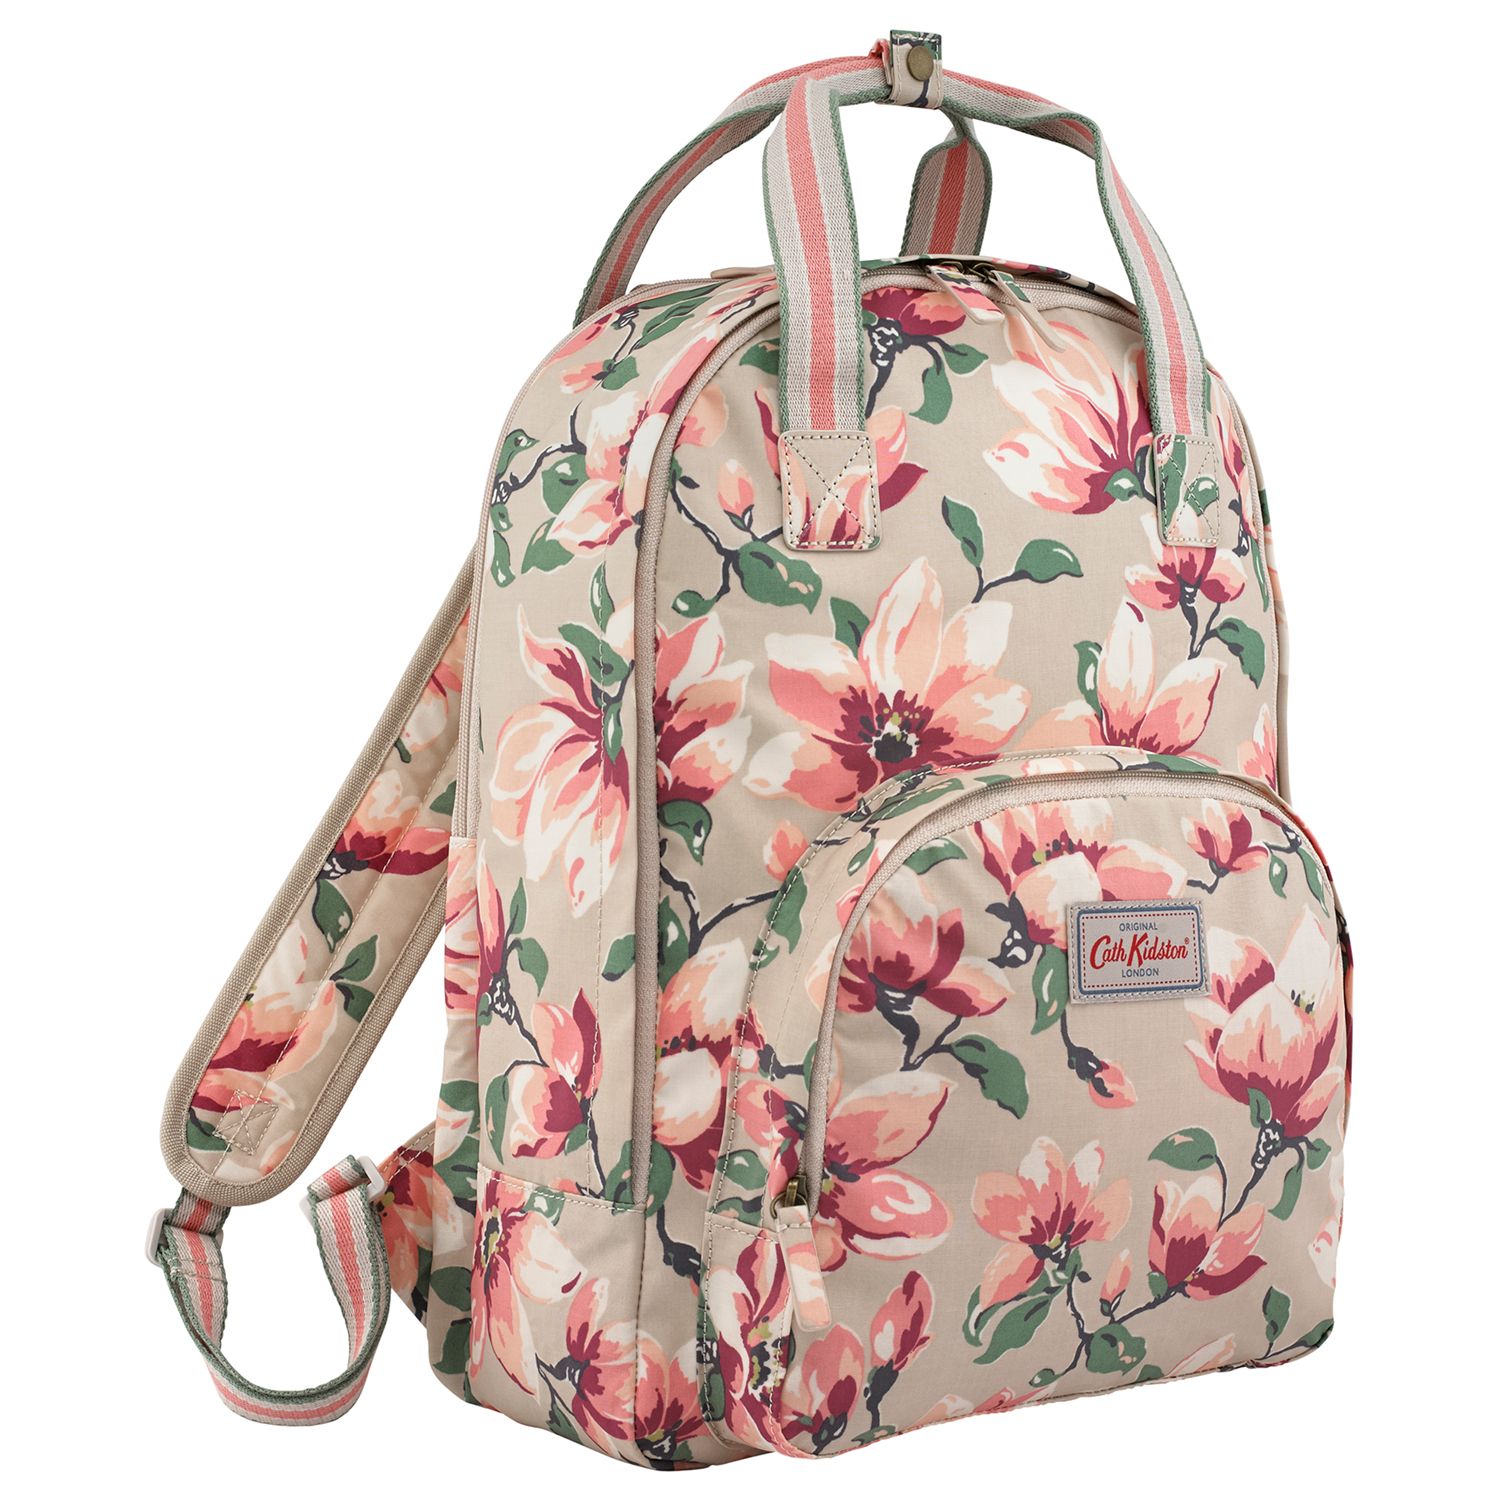 cath kidston multi pocket backpack review